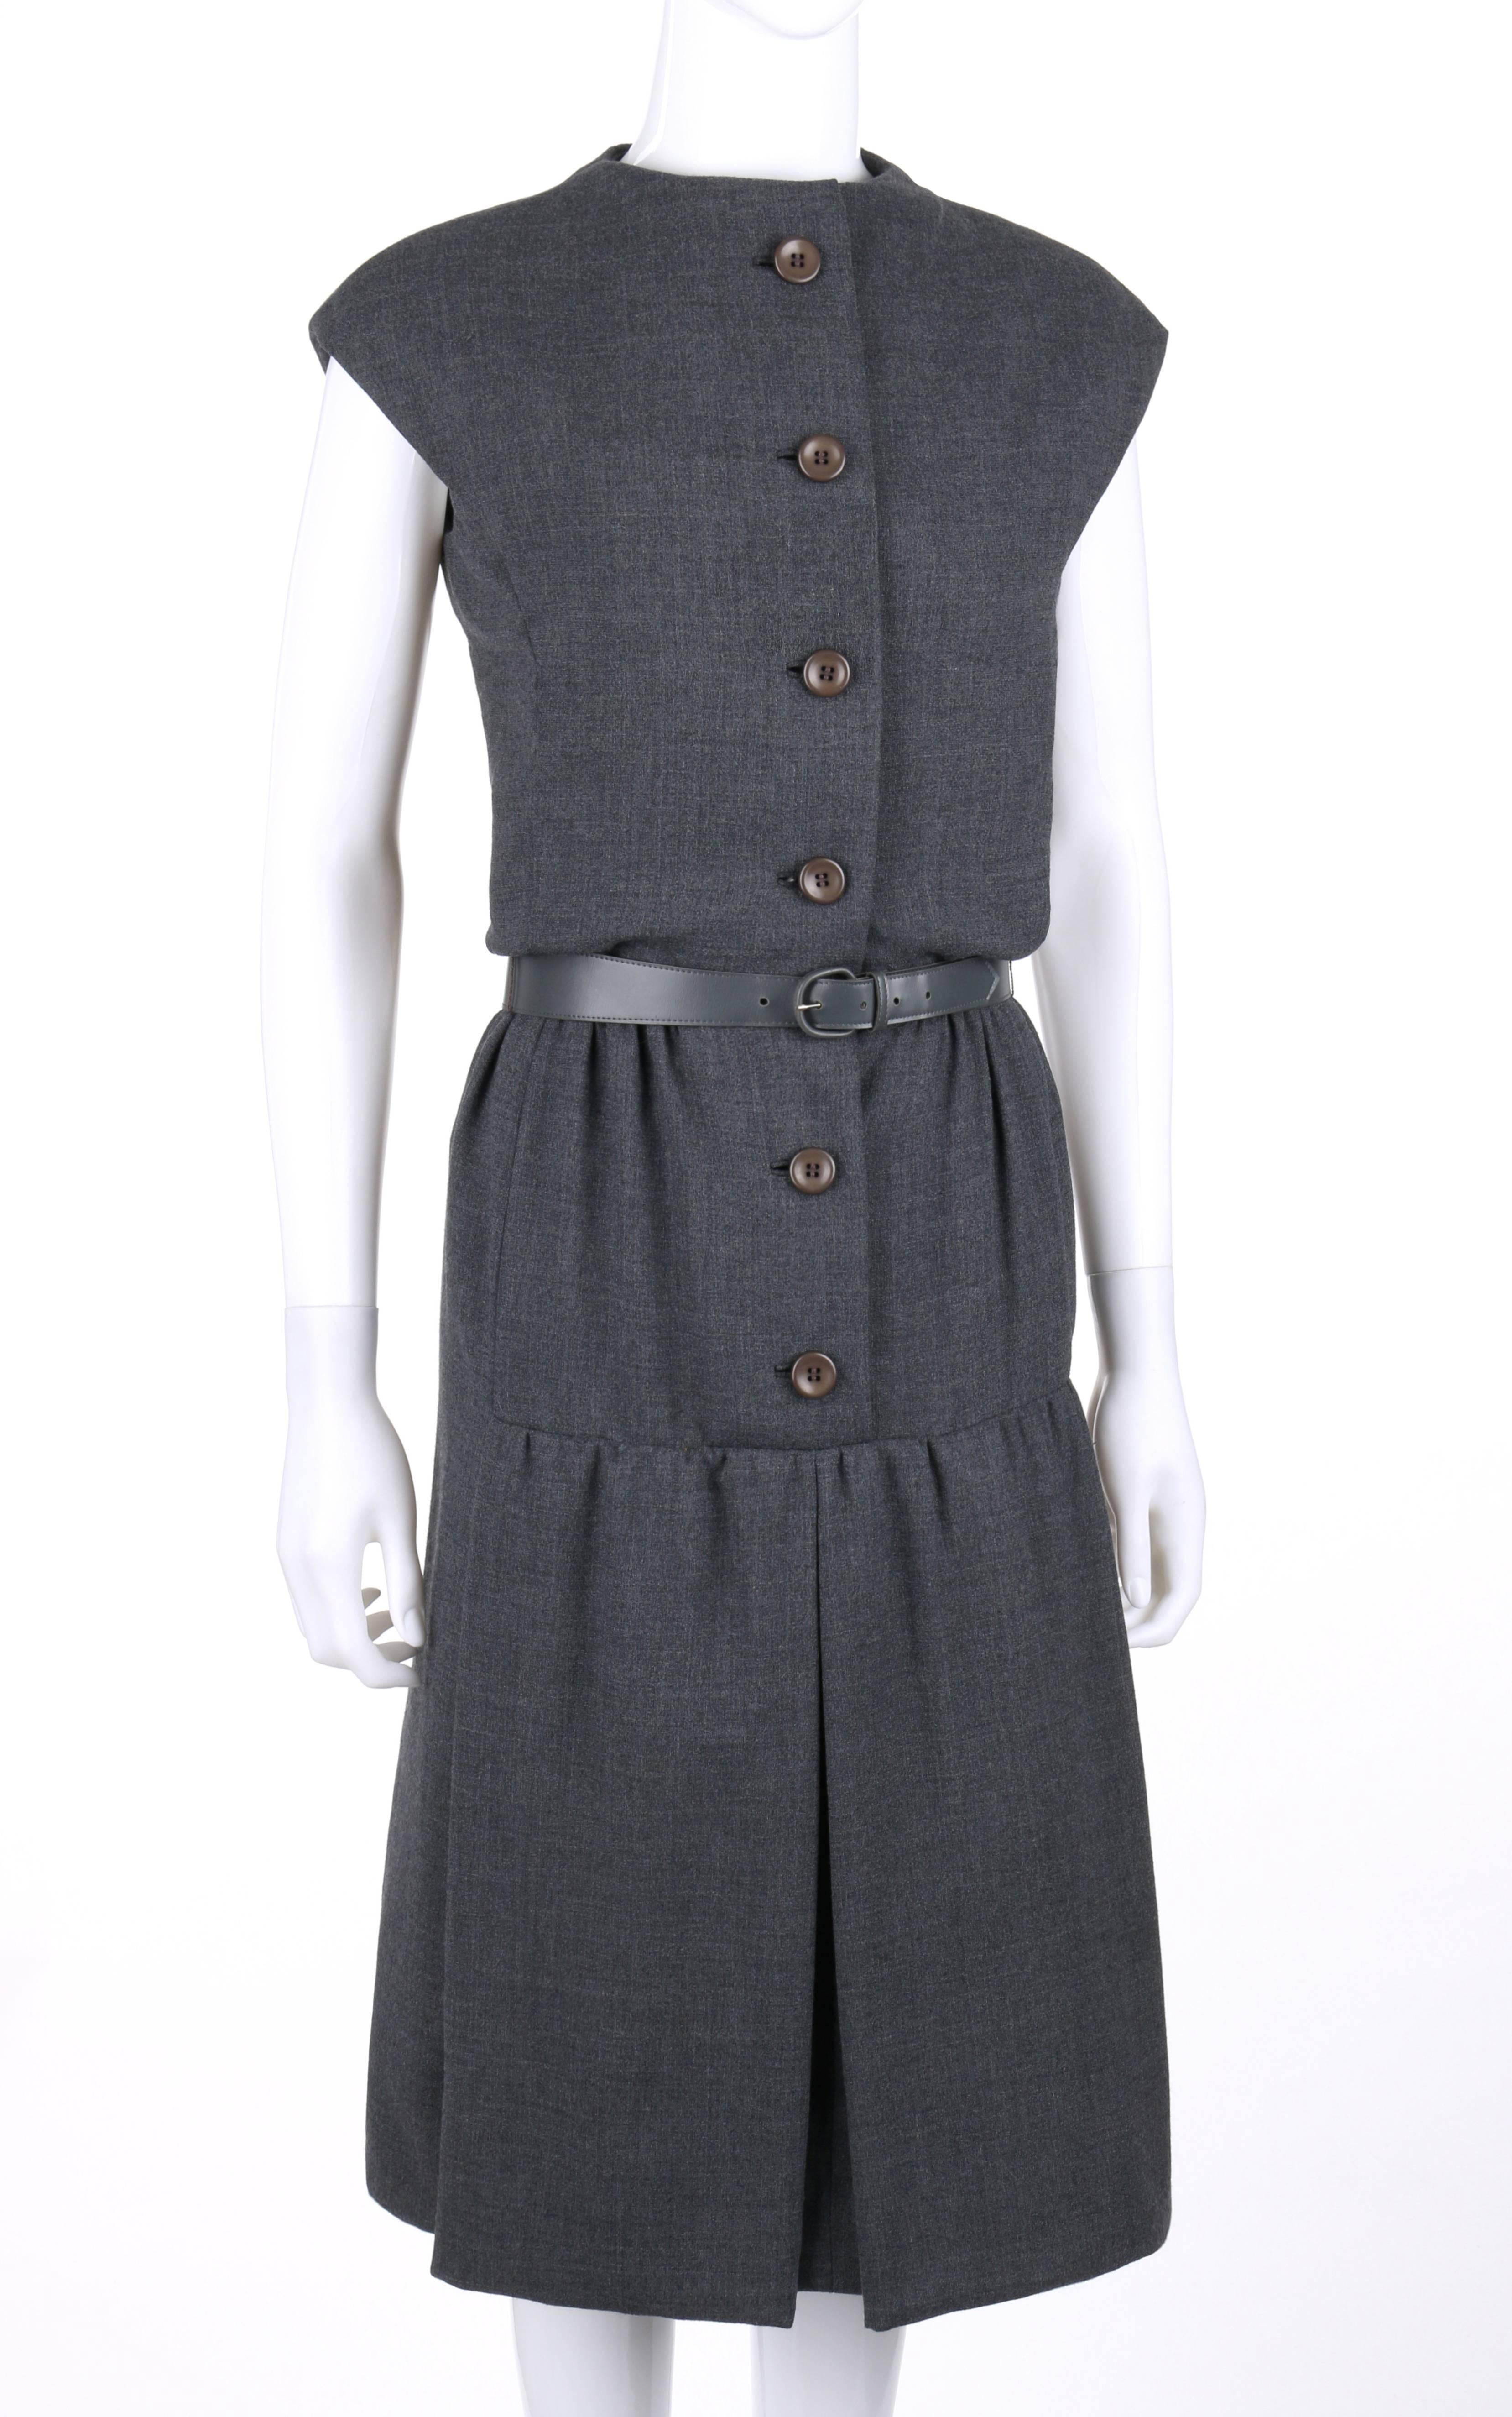 Vintage Geoffrey Beene c.1960's gray wool belted shift dress. Extended shoulders. Built up neckline. Six center front button closures with snap at neckline and hook and eye at waist. Gathered waistline. Two thread chain belt loops. Two gathered box